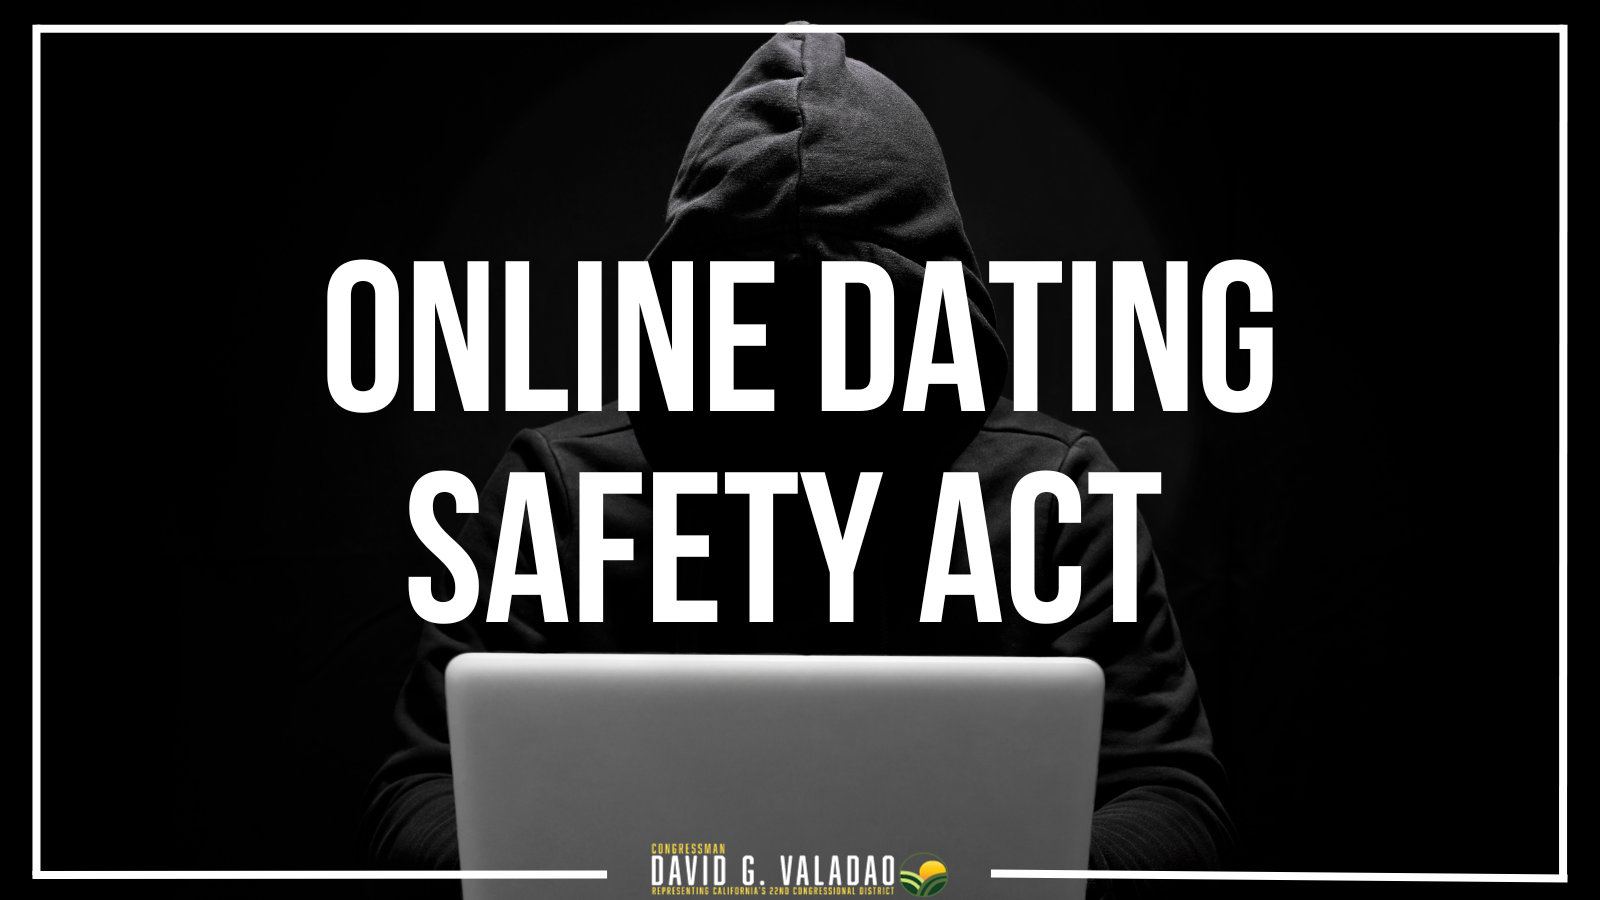 Rep. Valadao introduces Online Dating Safety Act